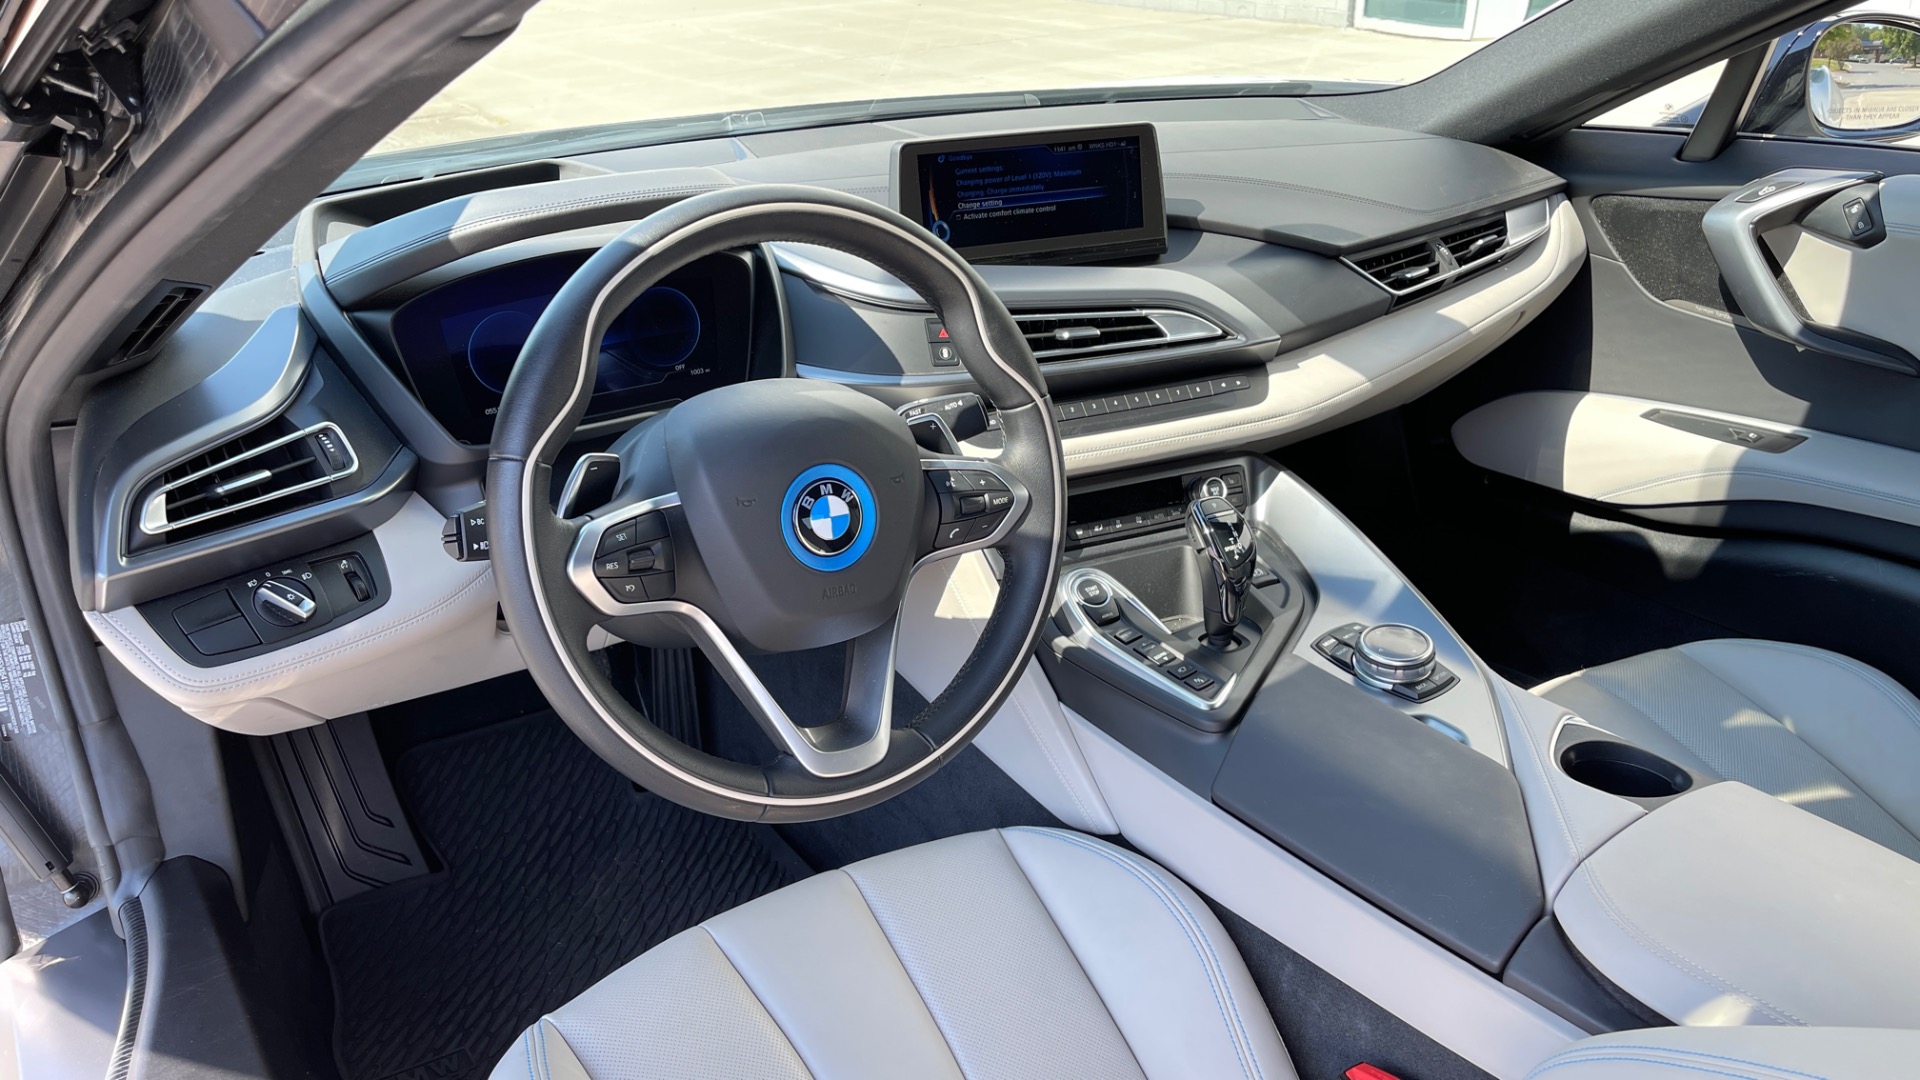 Used 2014 BMW i8 PURE IMPULSE WORLD / BLUE SEATBELTS / PERFORATED LEATHER / LED HEADLIGHTS for sale $75,999 at Formula Imports in Charlotte NC 28227 9